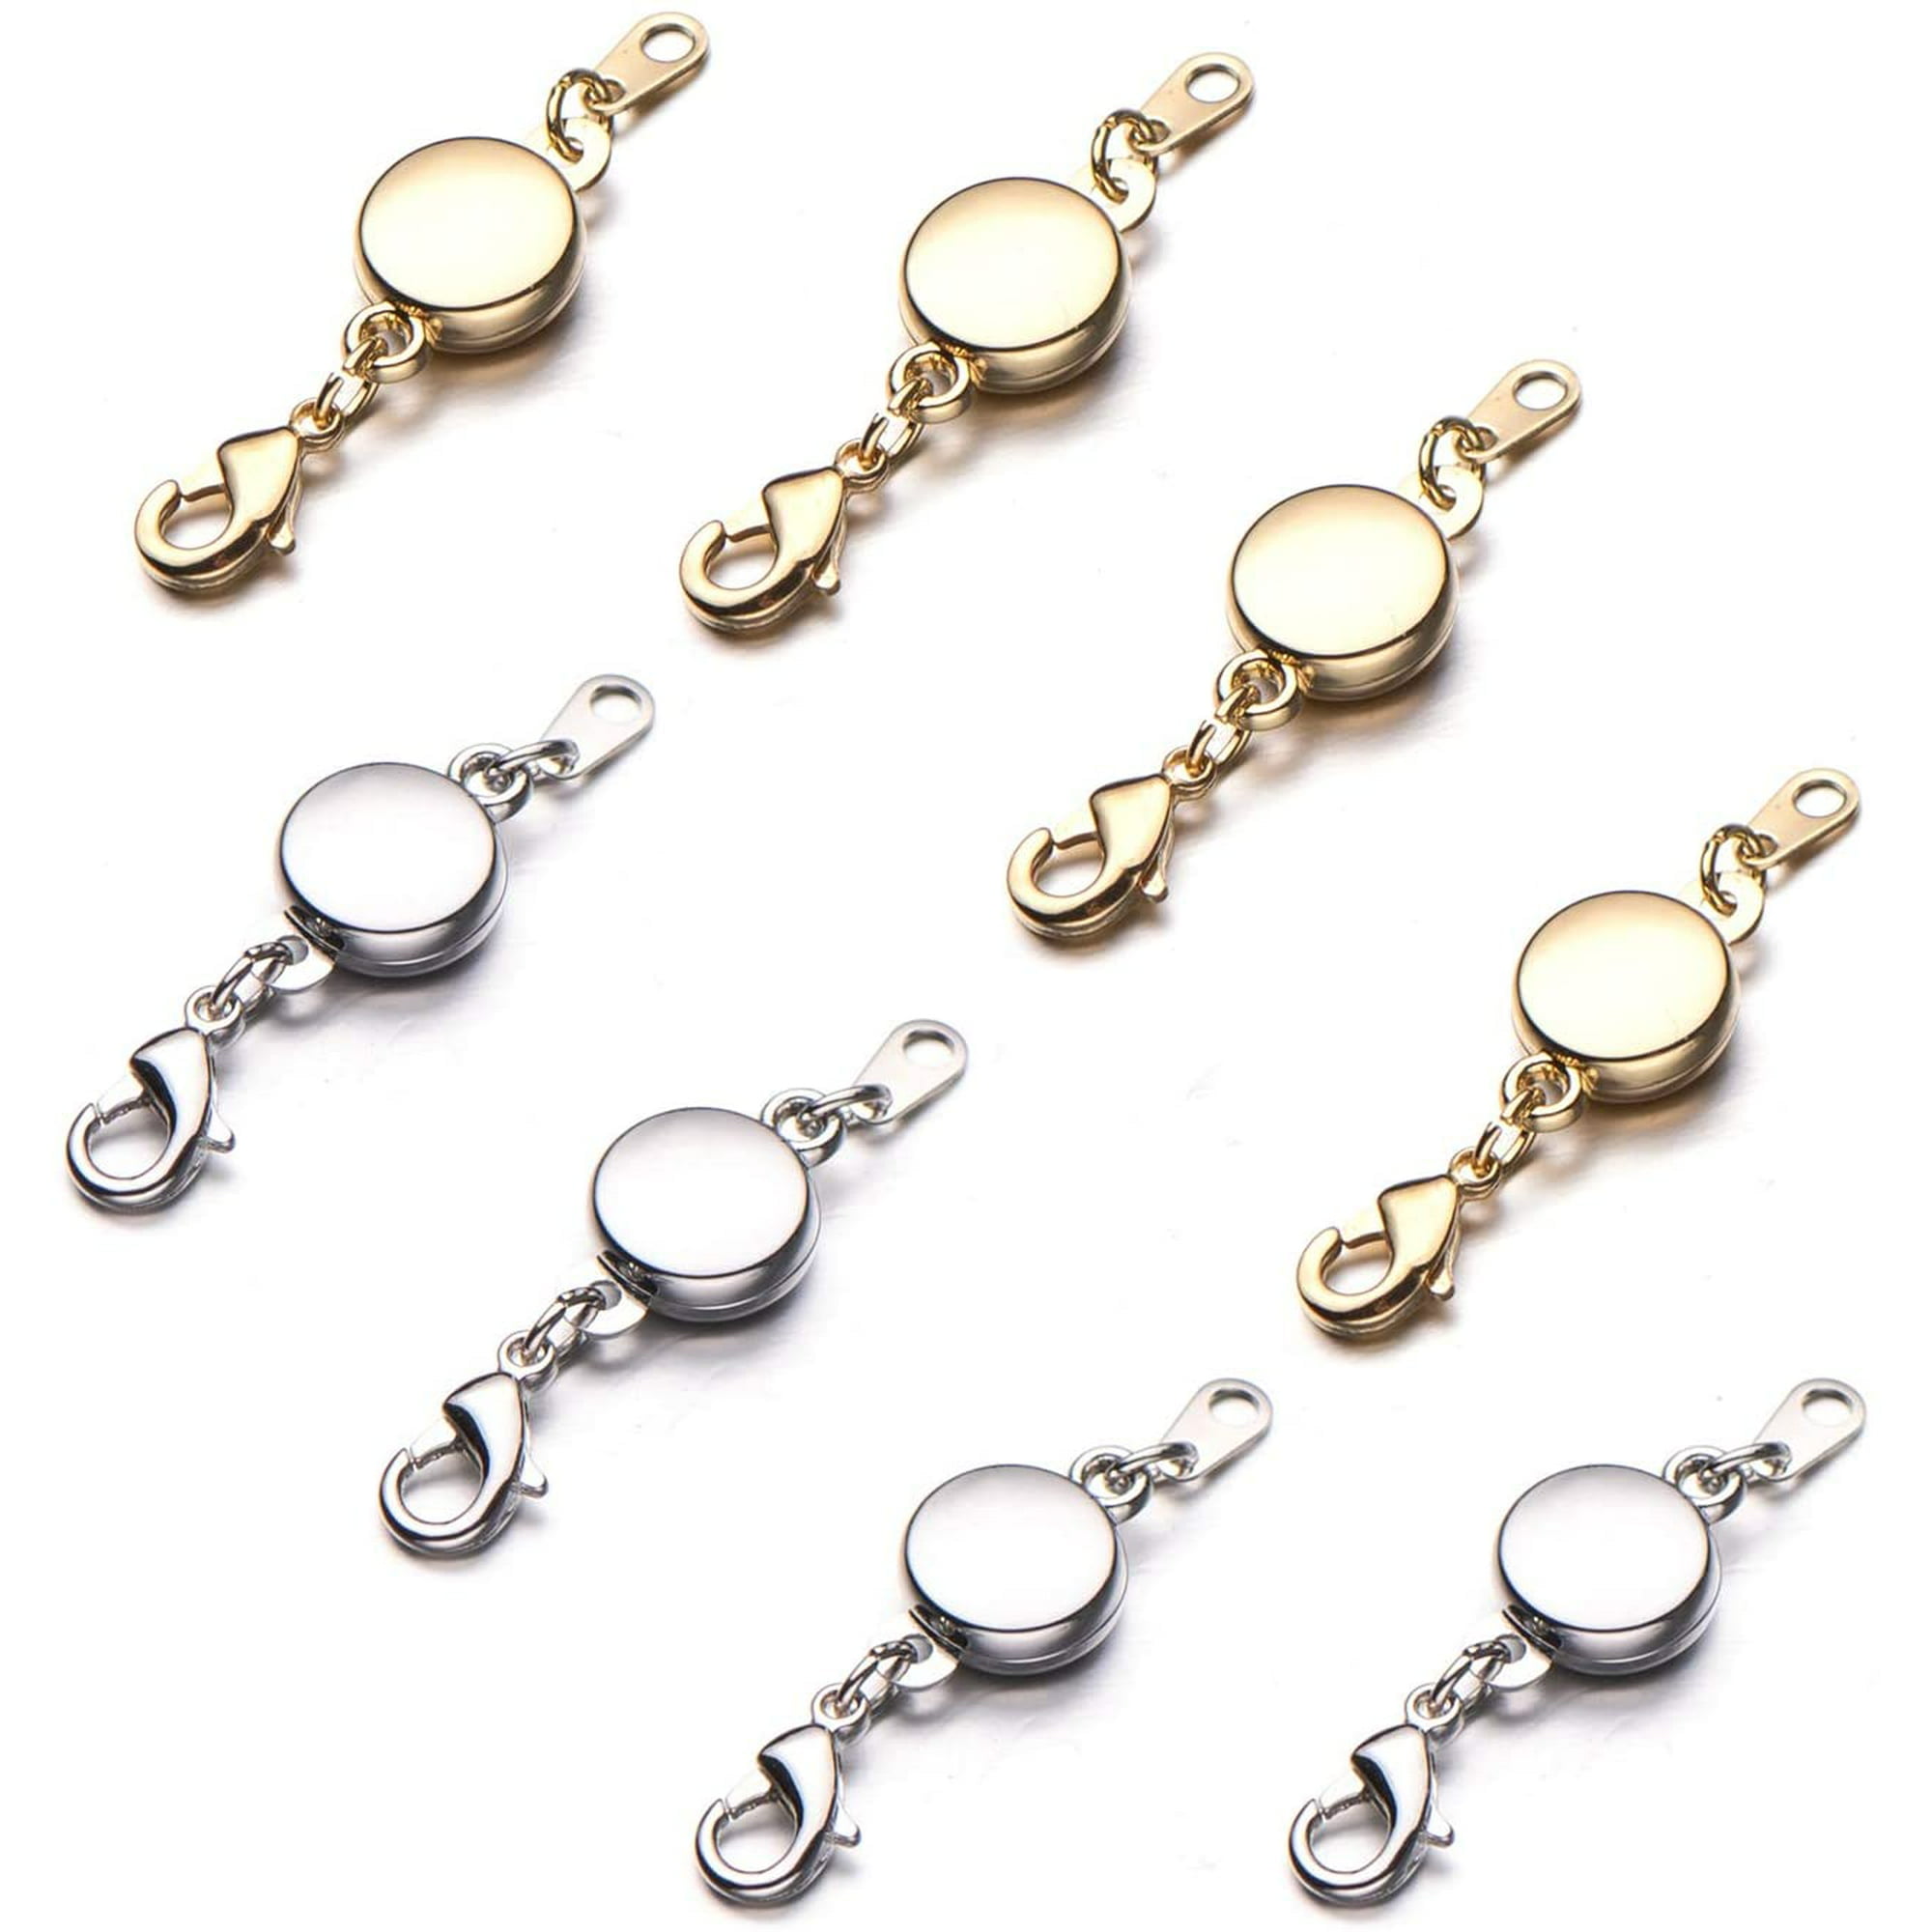 Qulltk Necklace clasps and closures 18K gold and Silver Plated Bracelet  converter clasp,Suitable for Necklaces chain Extender